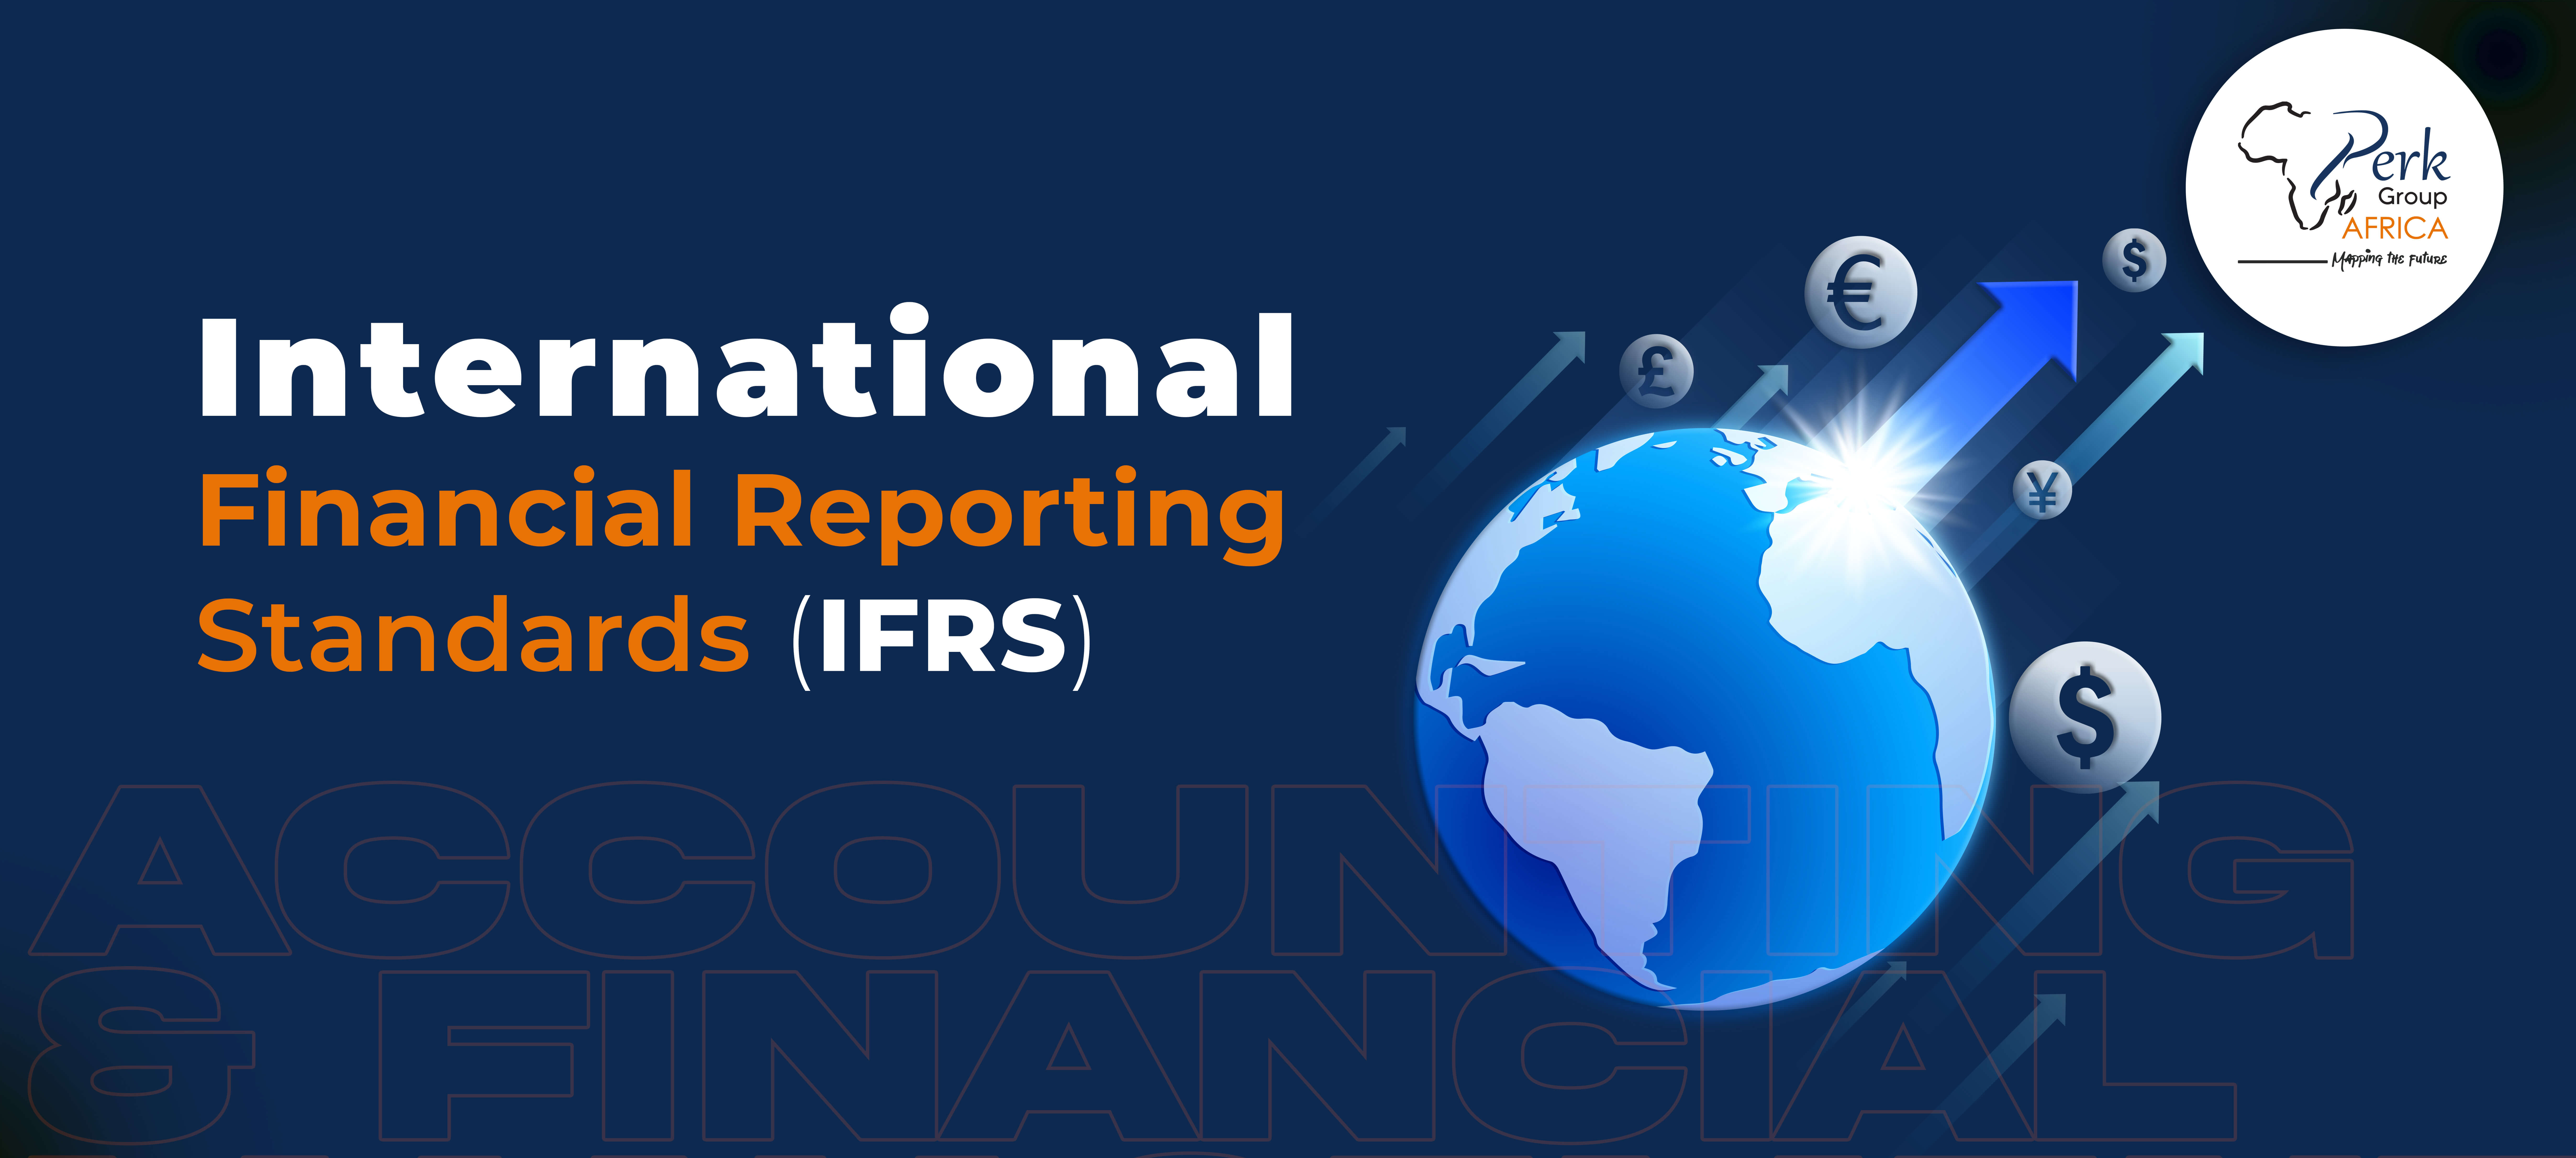 Training Course on International Financial Reporting Standards